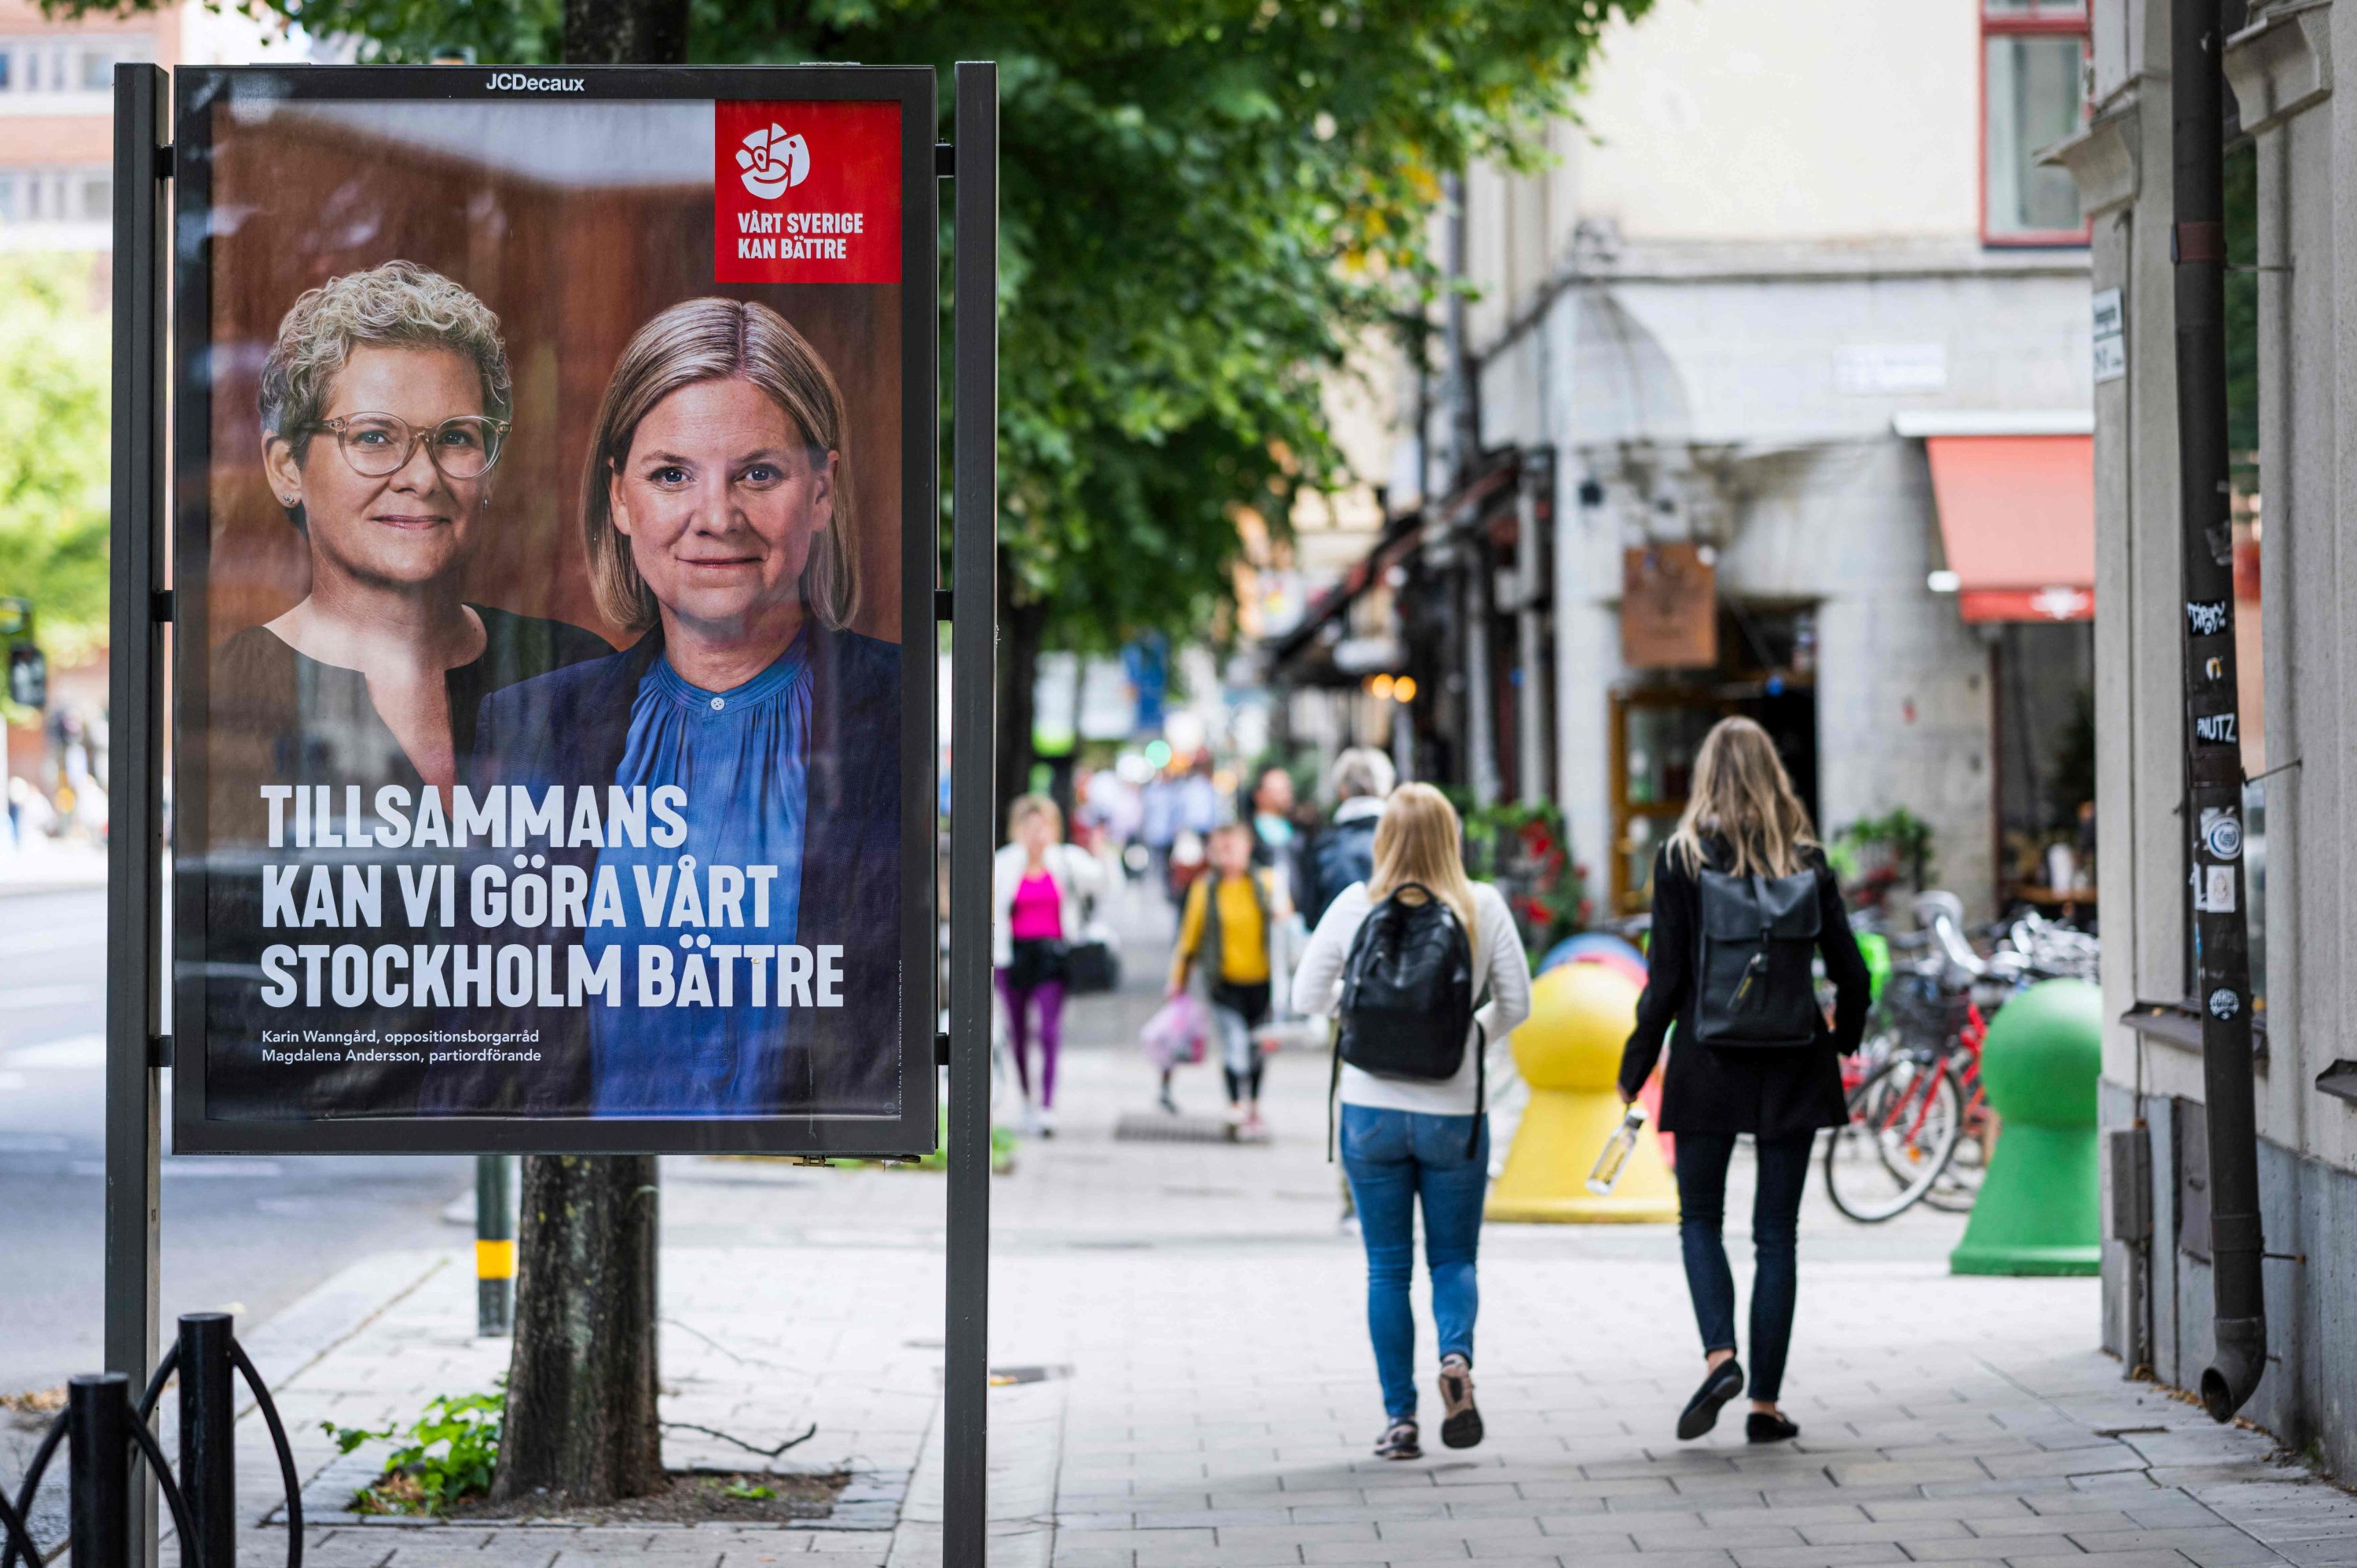 casting elections light on rise of Racism and discrimination in Sweden